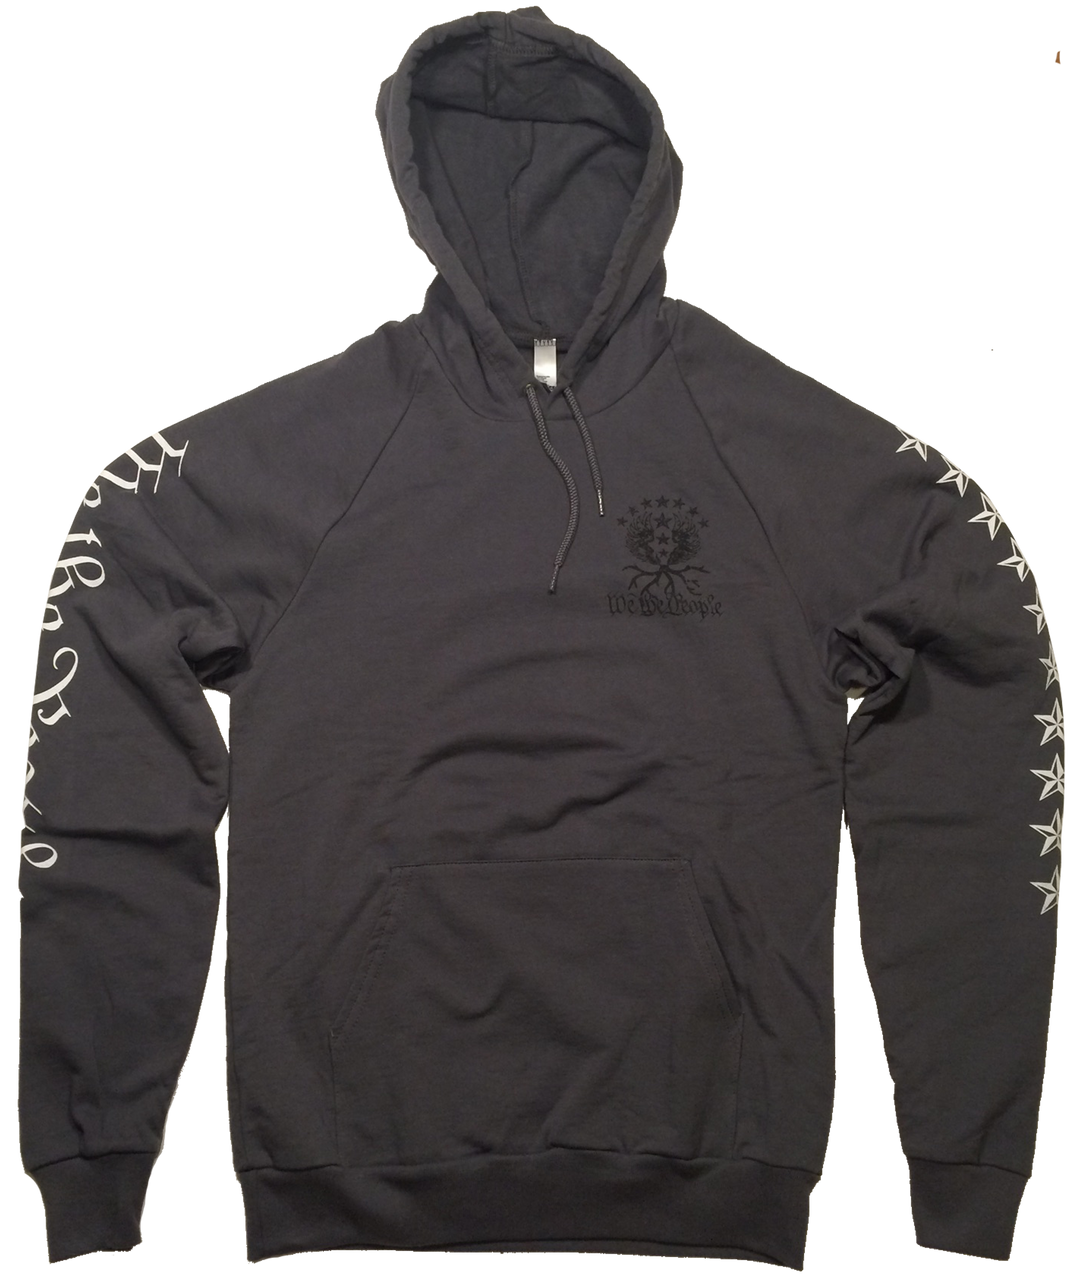 Support Those Who Defend Us Hoodie| Asphalt - We the People Apparel